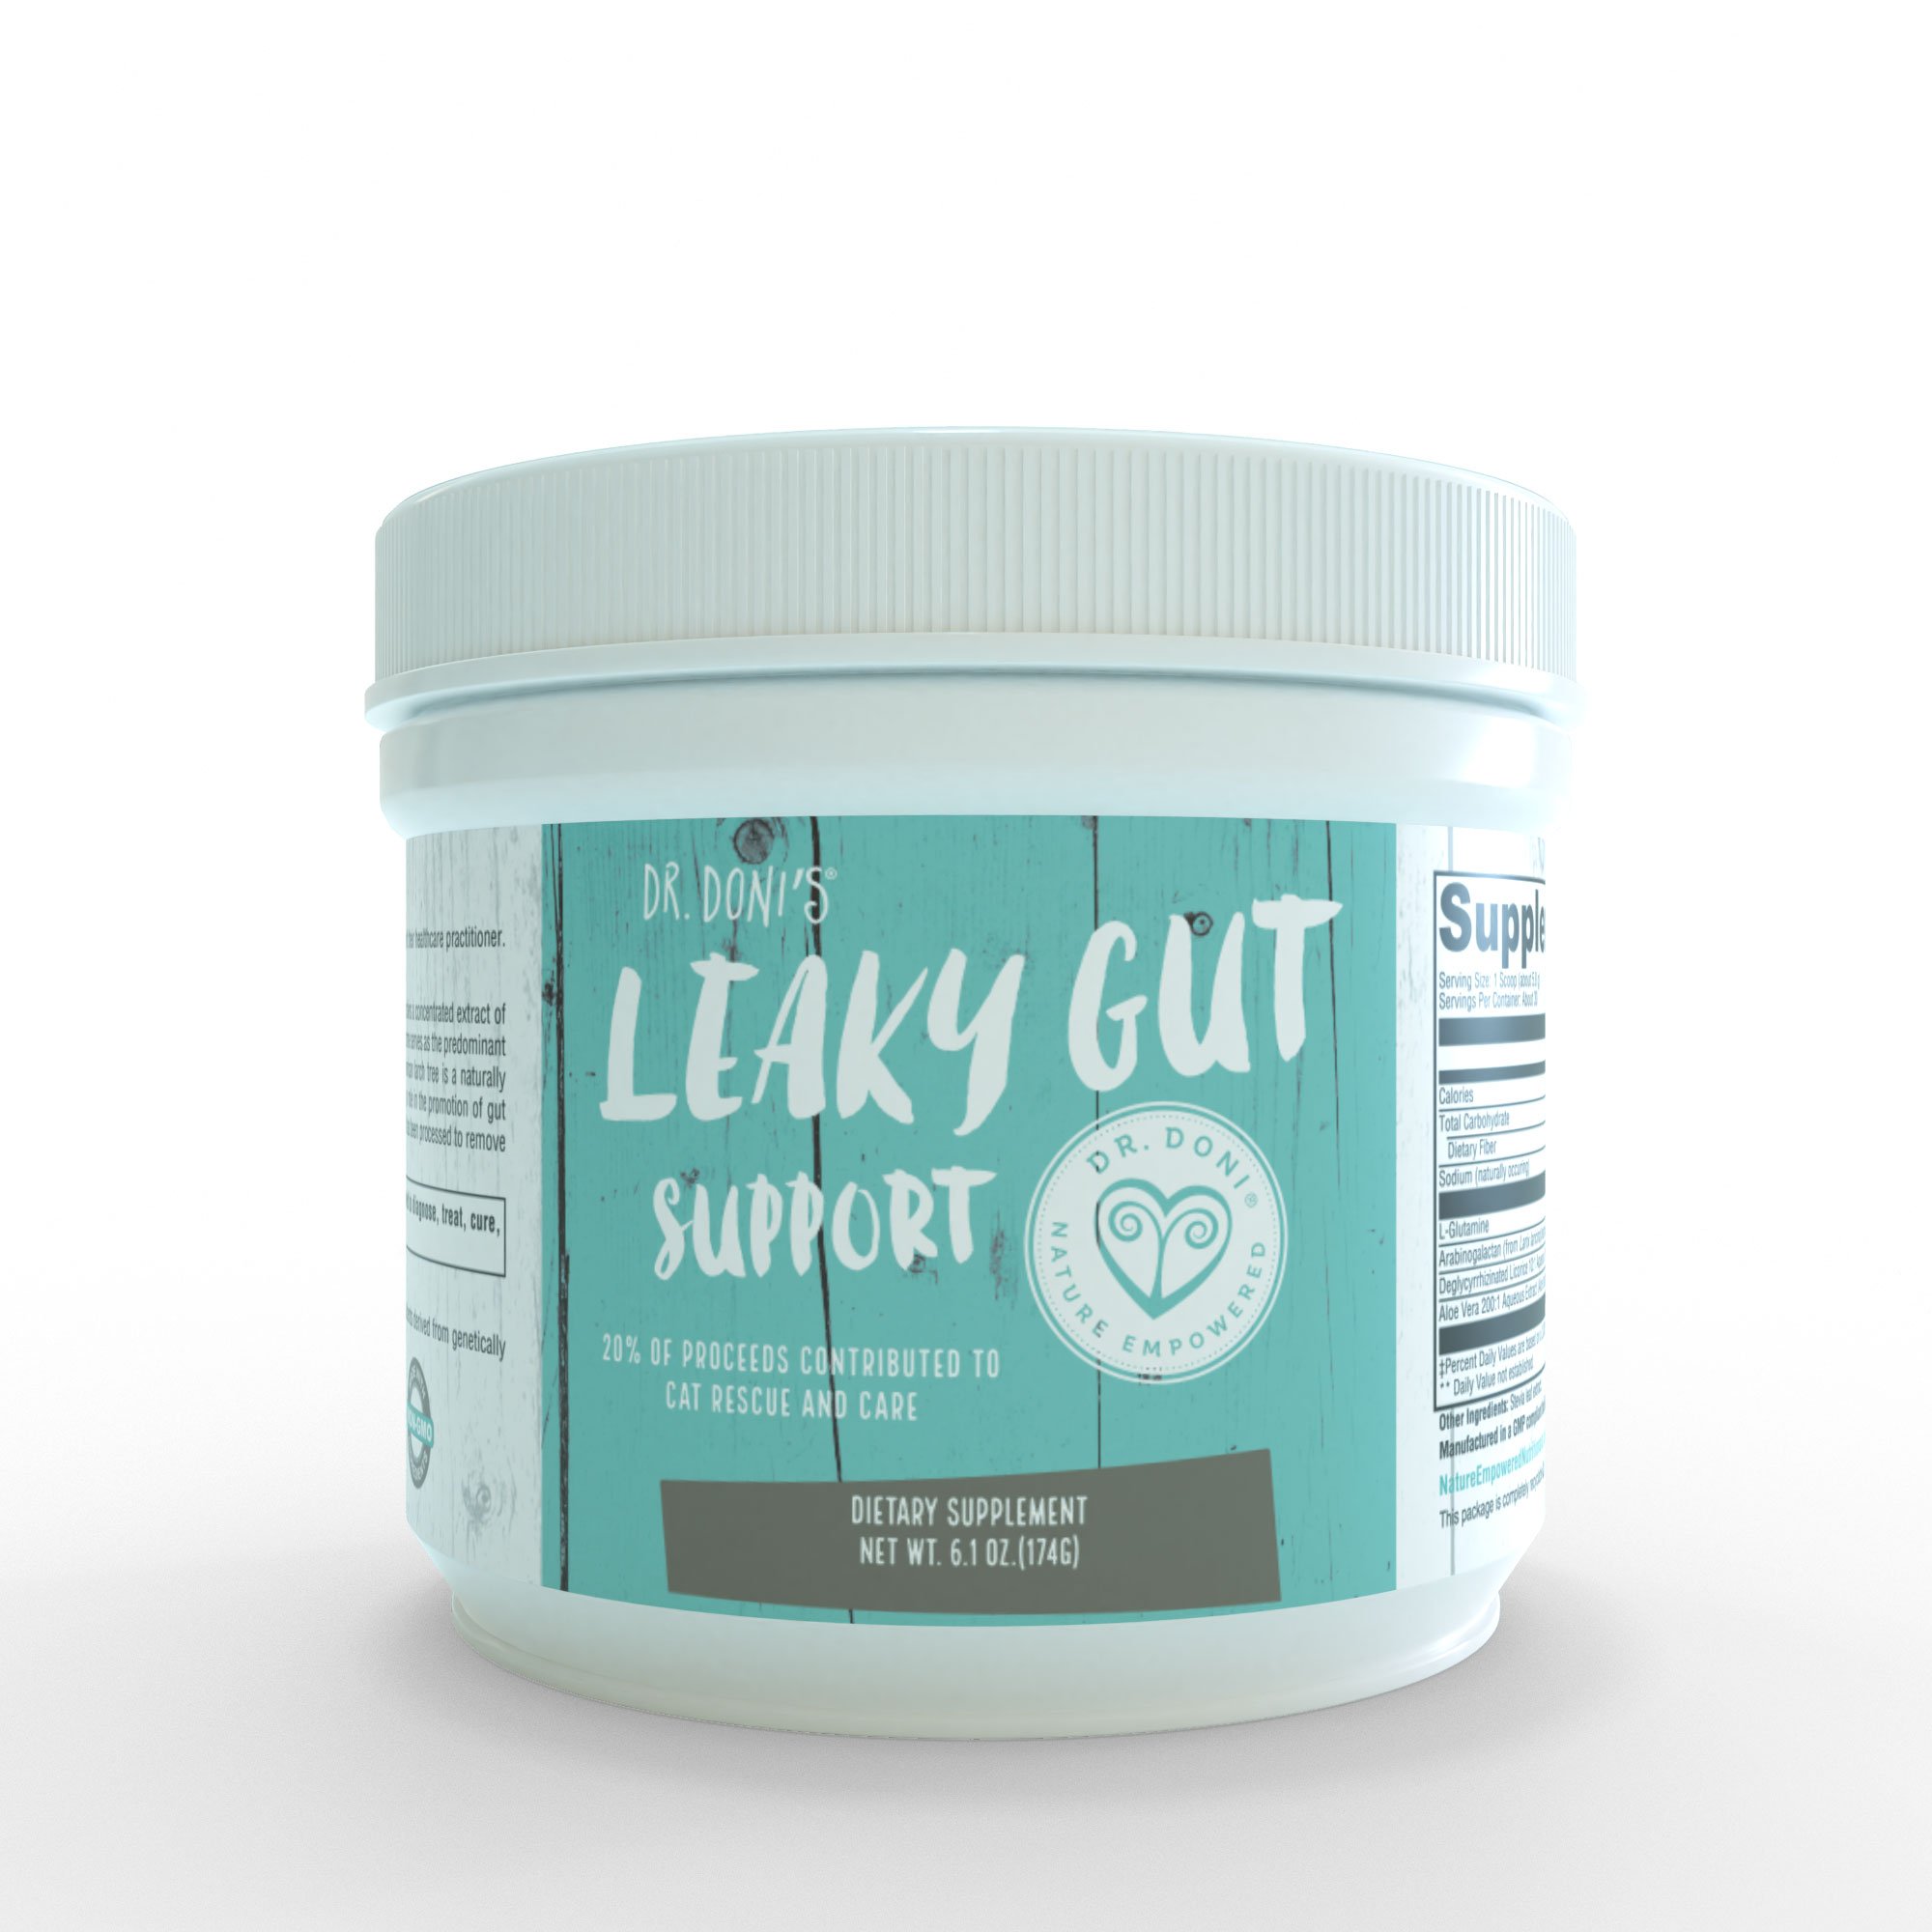 Dr. Doni's Leaky Gut Support, 6.1 oz